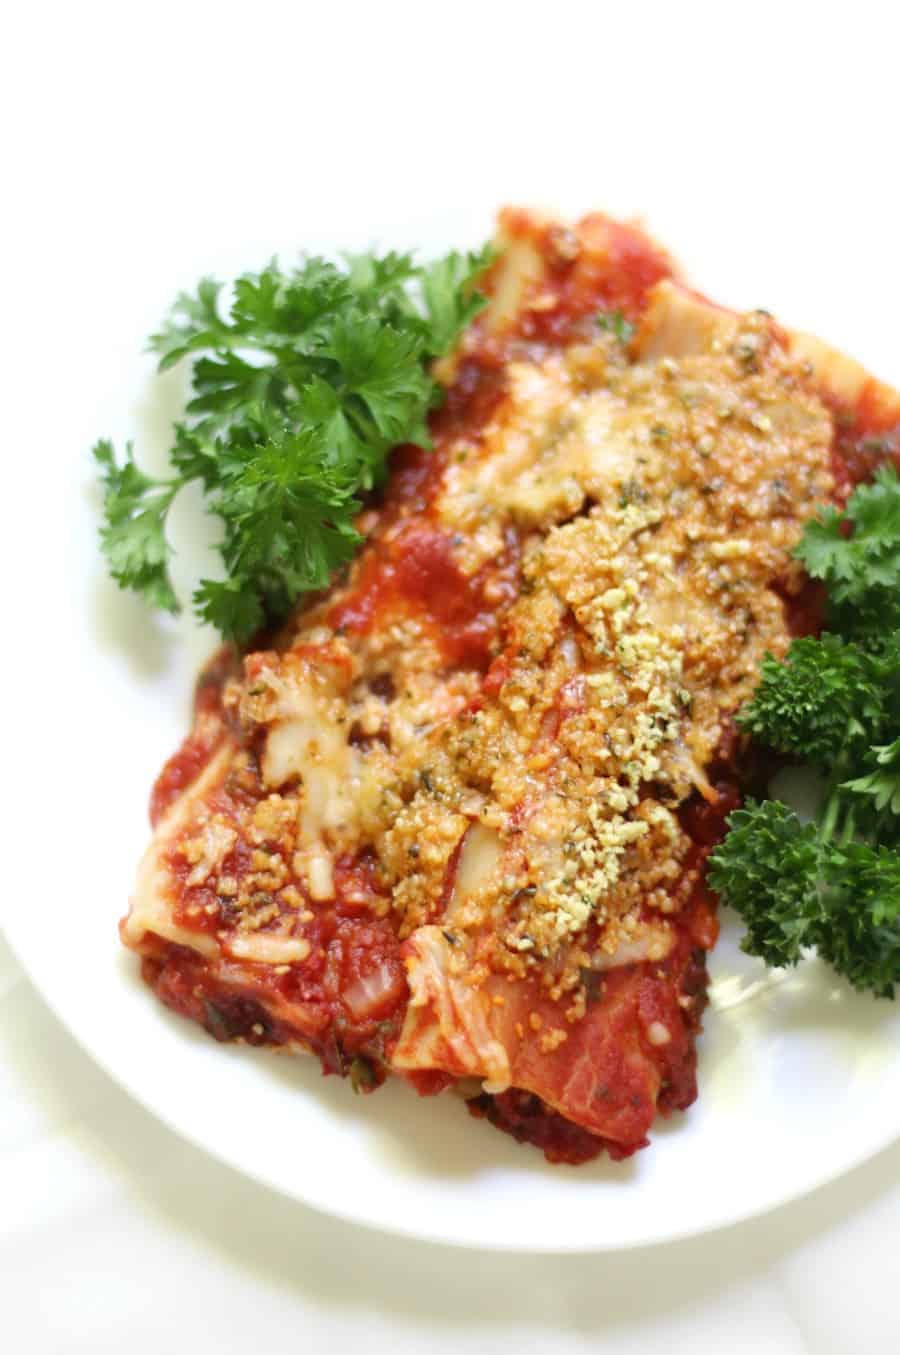 Classic Baked Gluten-Free + Vegan Manicotti (Soy-Free) | Strength and Sunshine @RebeccaGF666 No more missing out on your Italian favorite! A Classic Baked Gluten-Free & Vegan Manicotti recipe with homemade tomato sauce, a creamy dairy-free & soy-free cheesy filling, all topped with a homemade 2-ingredient "parmesan"! A perfect comfort food dinner the whole family will enjoy! #glutenfree #vegan #pasta #dinner #manicotti #dairyfree #soyfree #eggfree #glutenfreepasta / --
